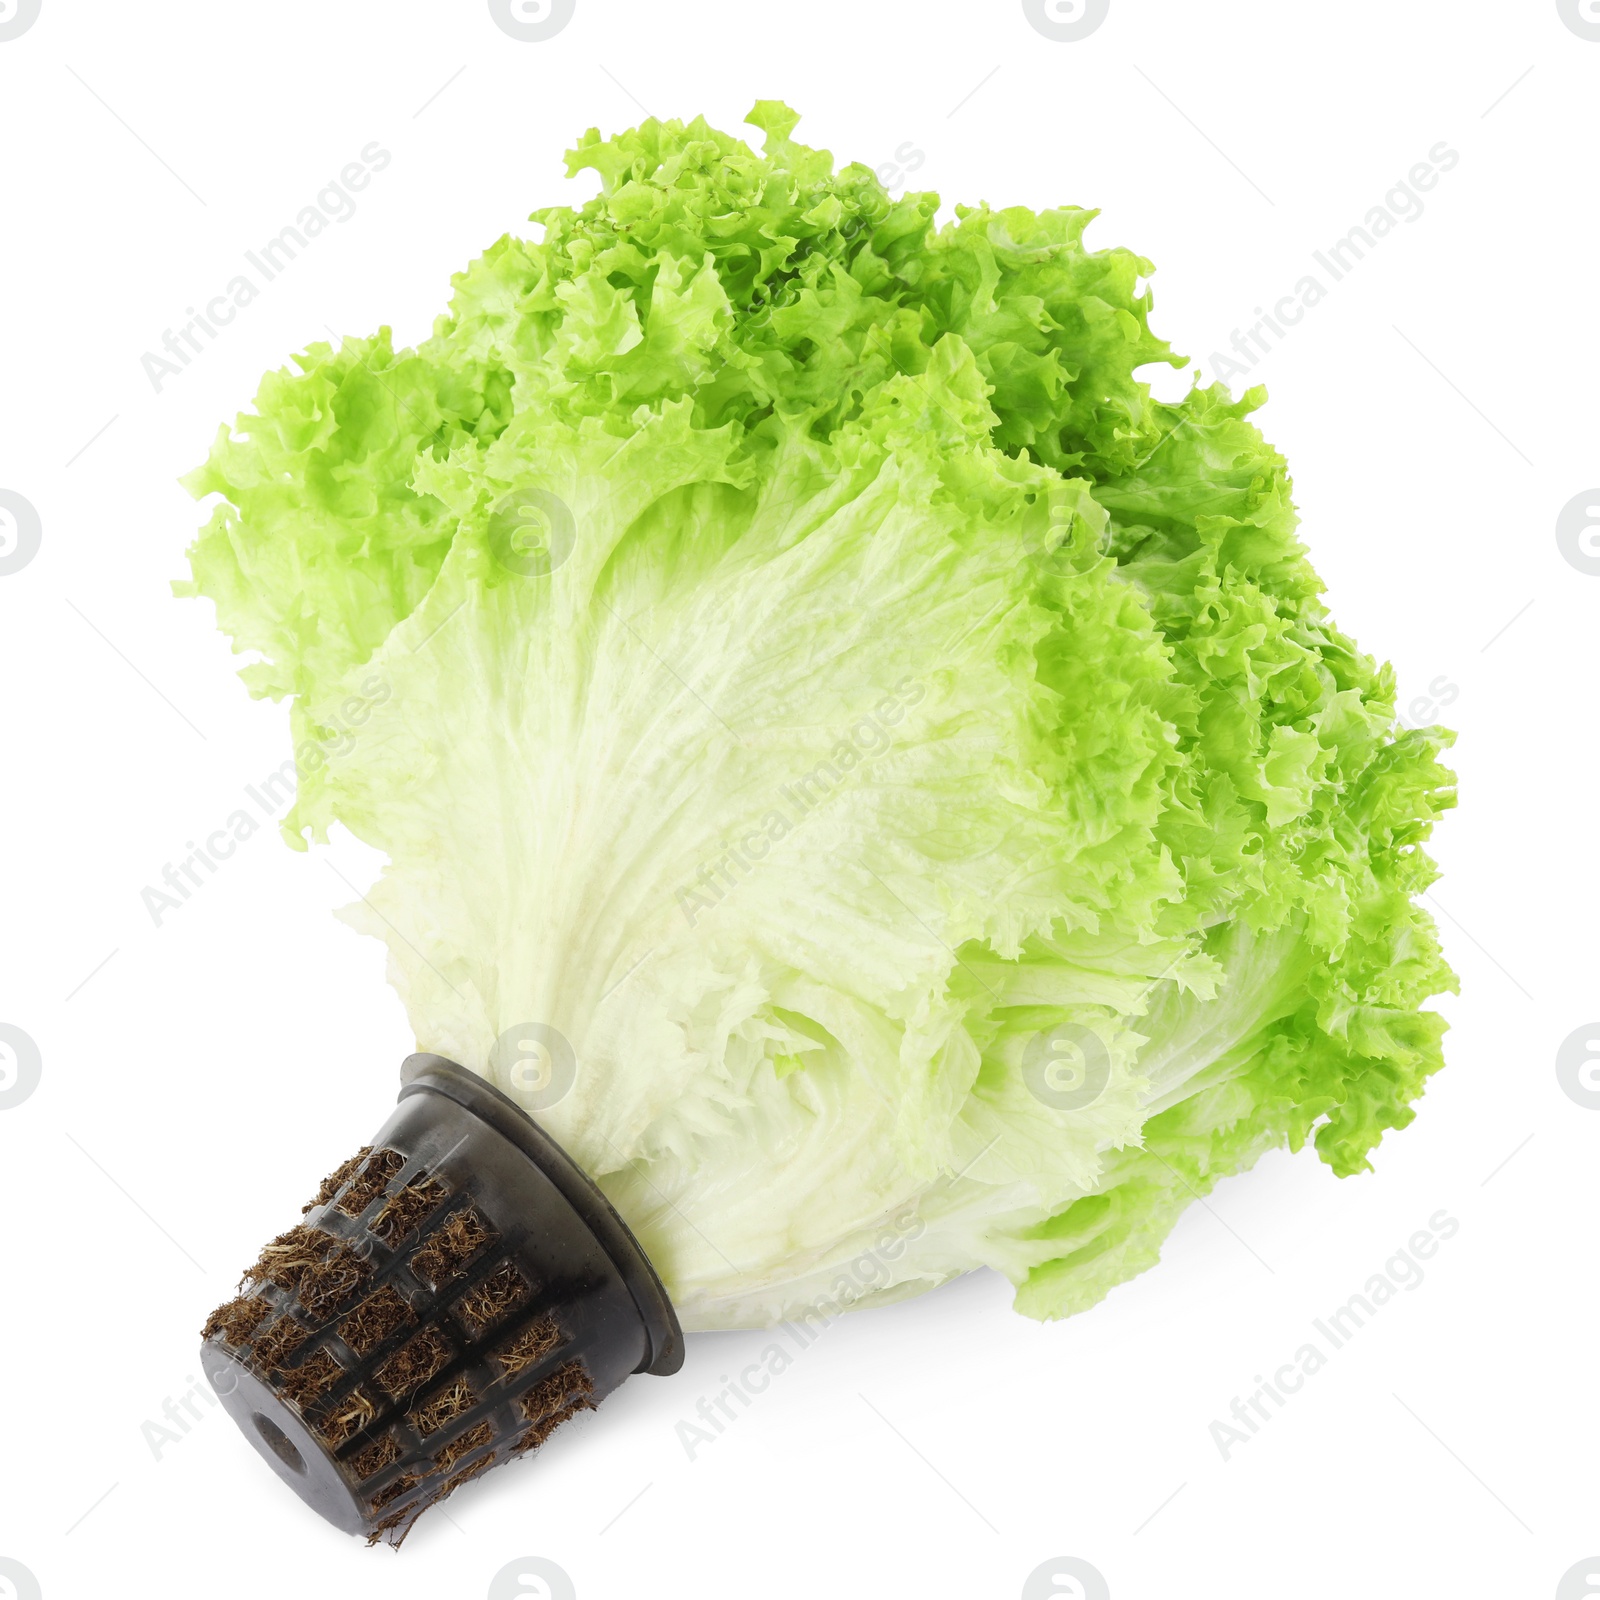 Photo of Fresh lettuce isolated on white. Salad greens